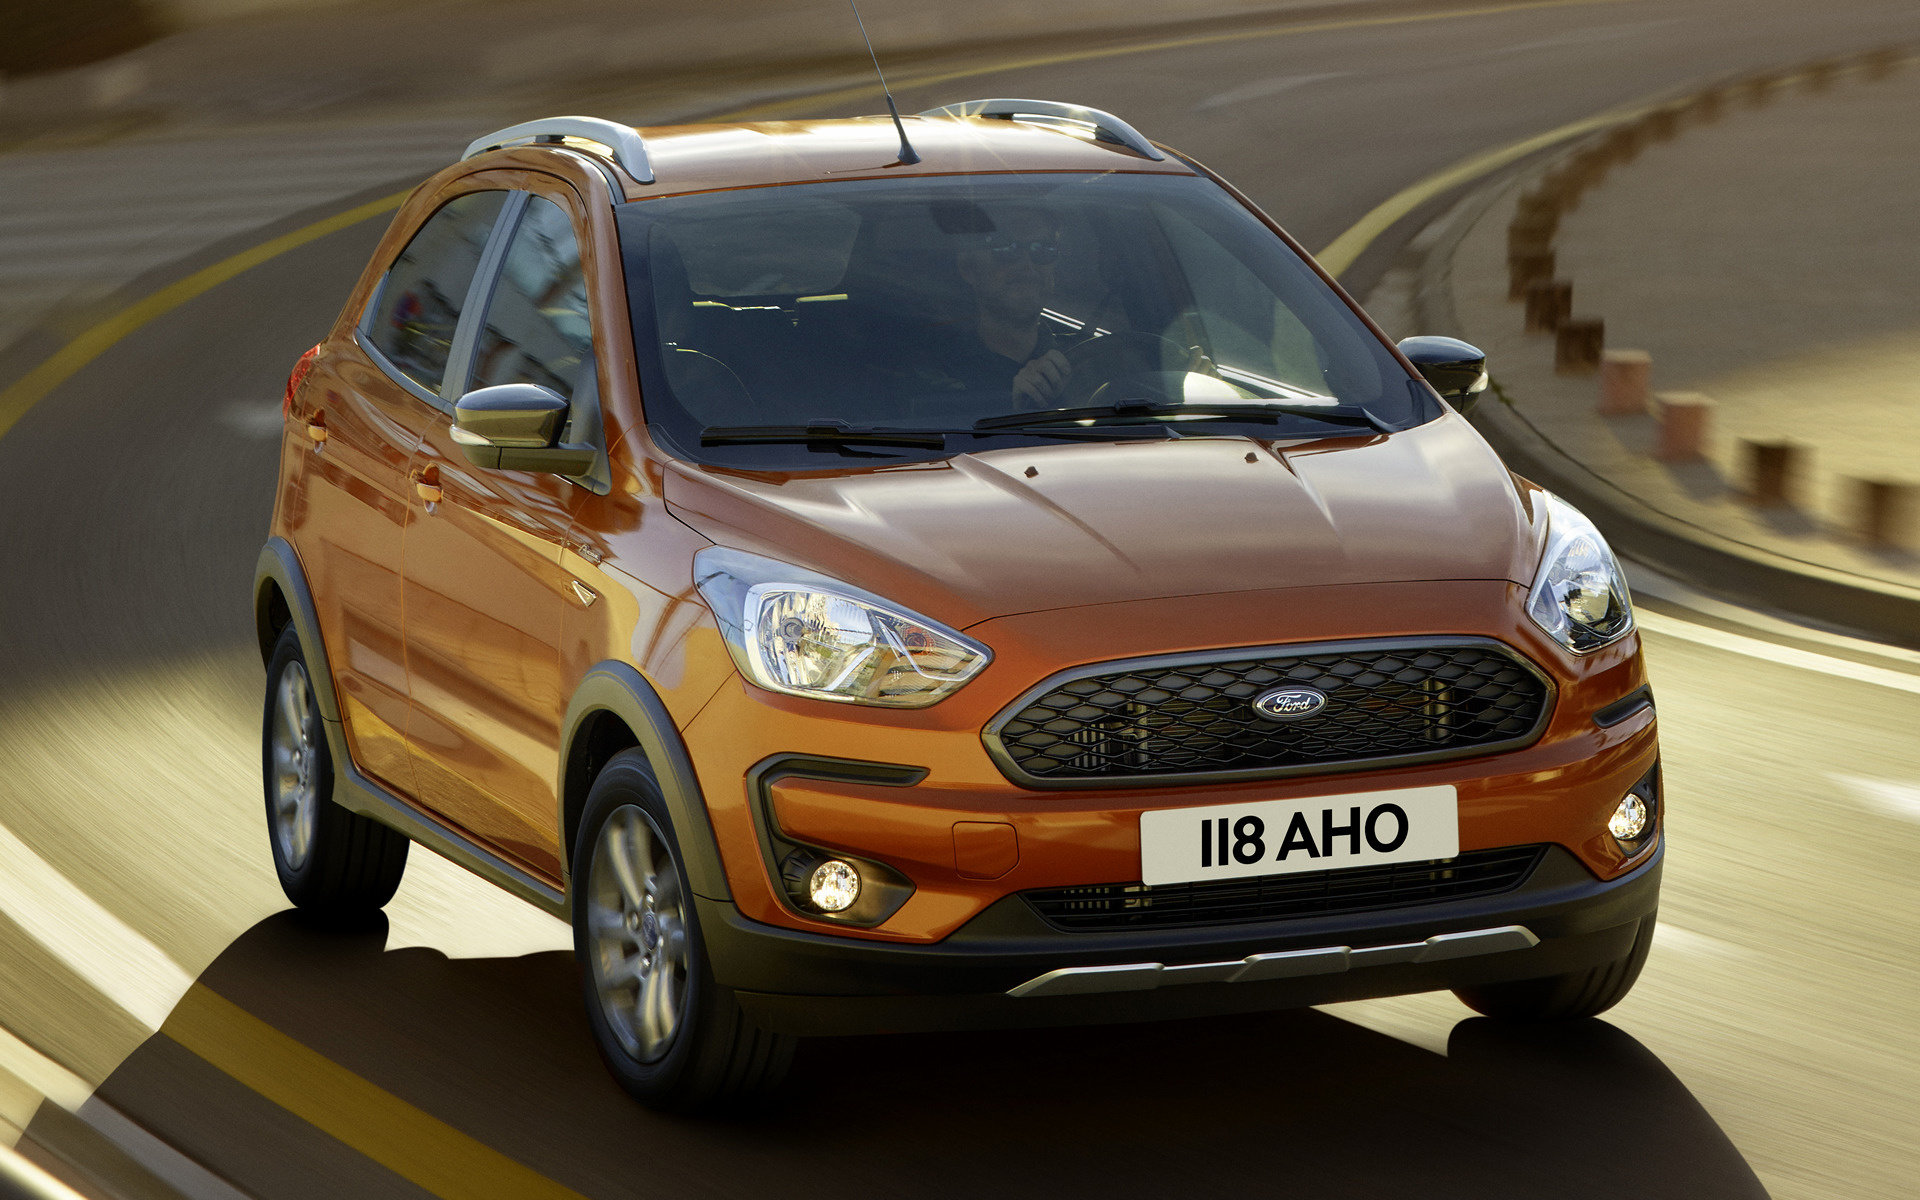 2018 Ford Ka+ Active - Wallpapers and HD Images | Car Pixel1920 x 1200